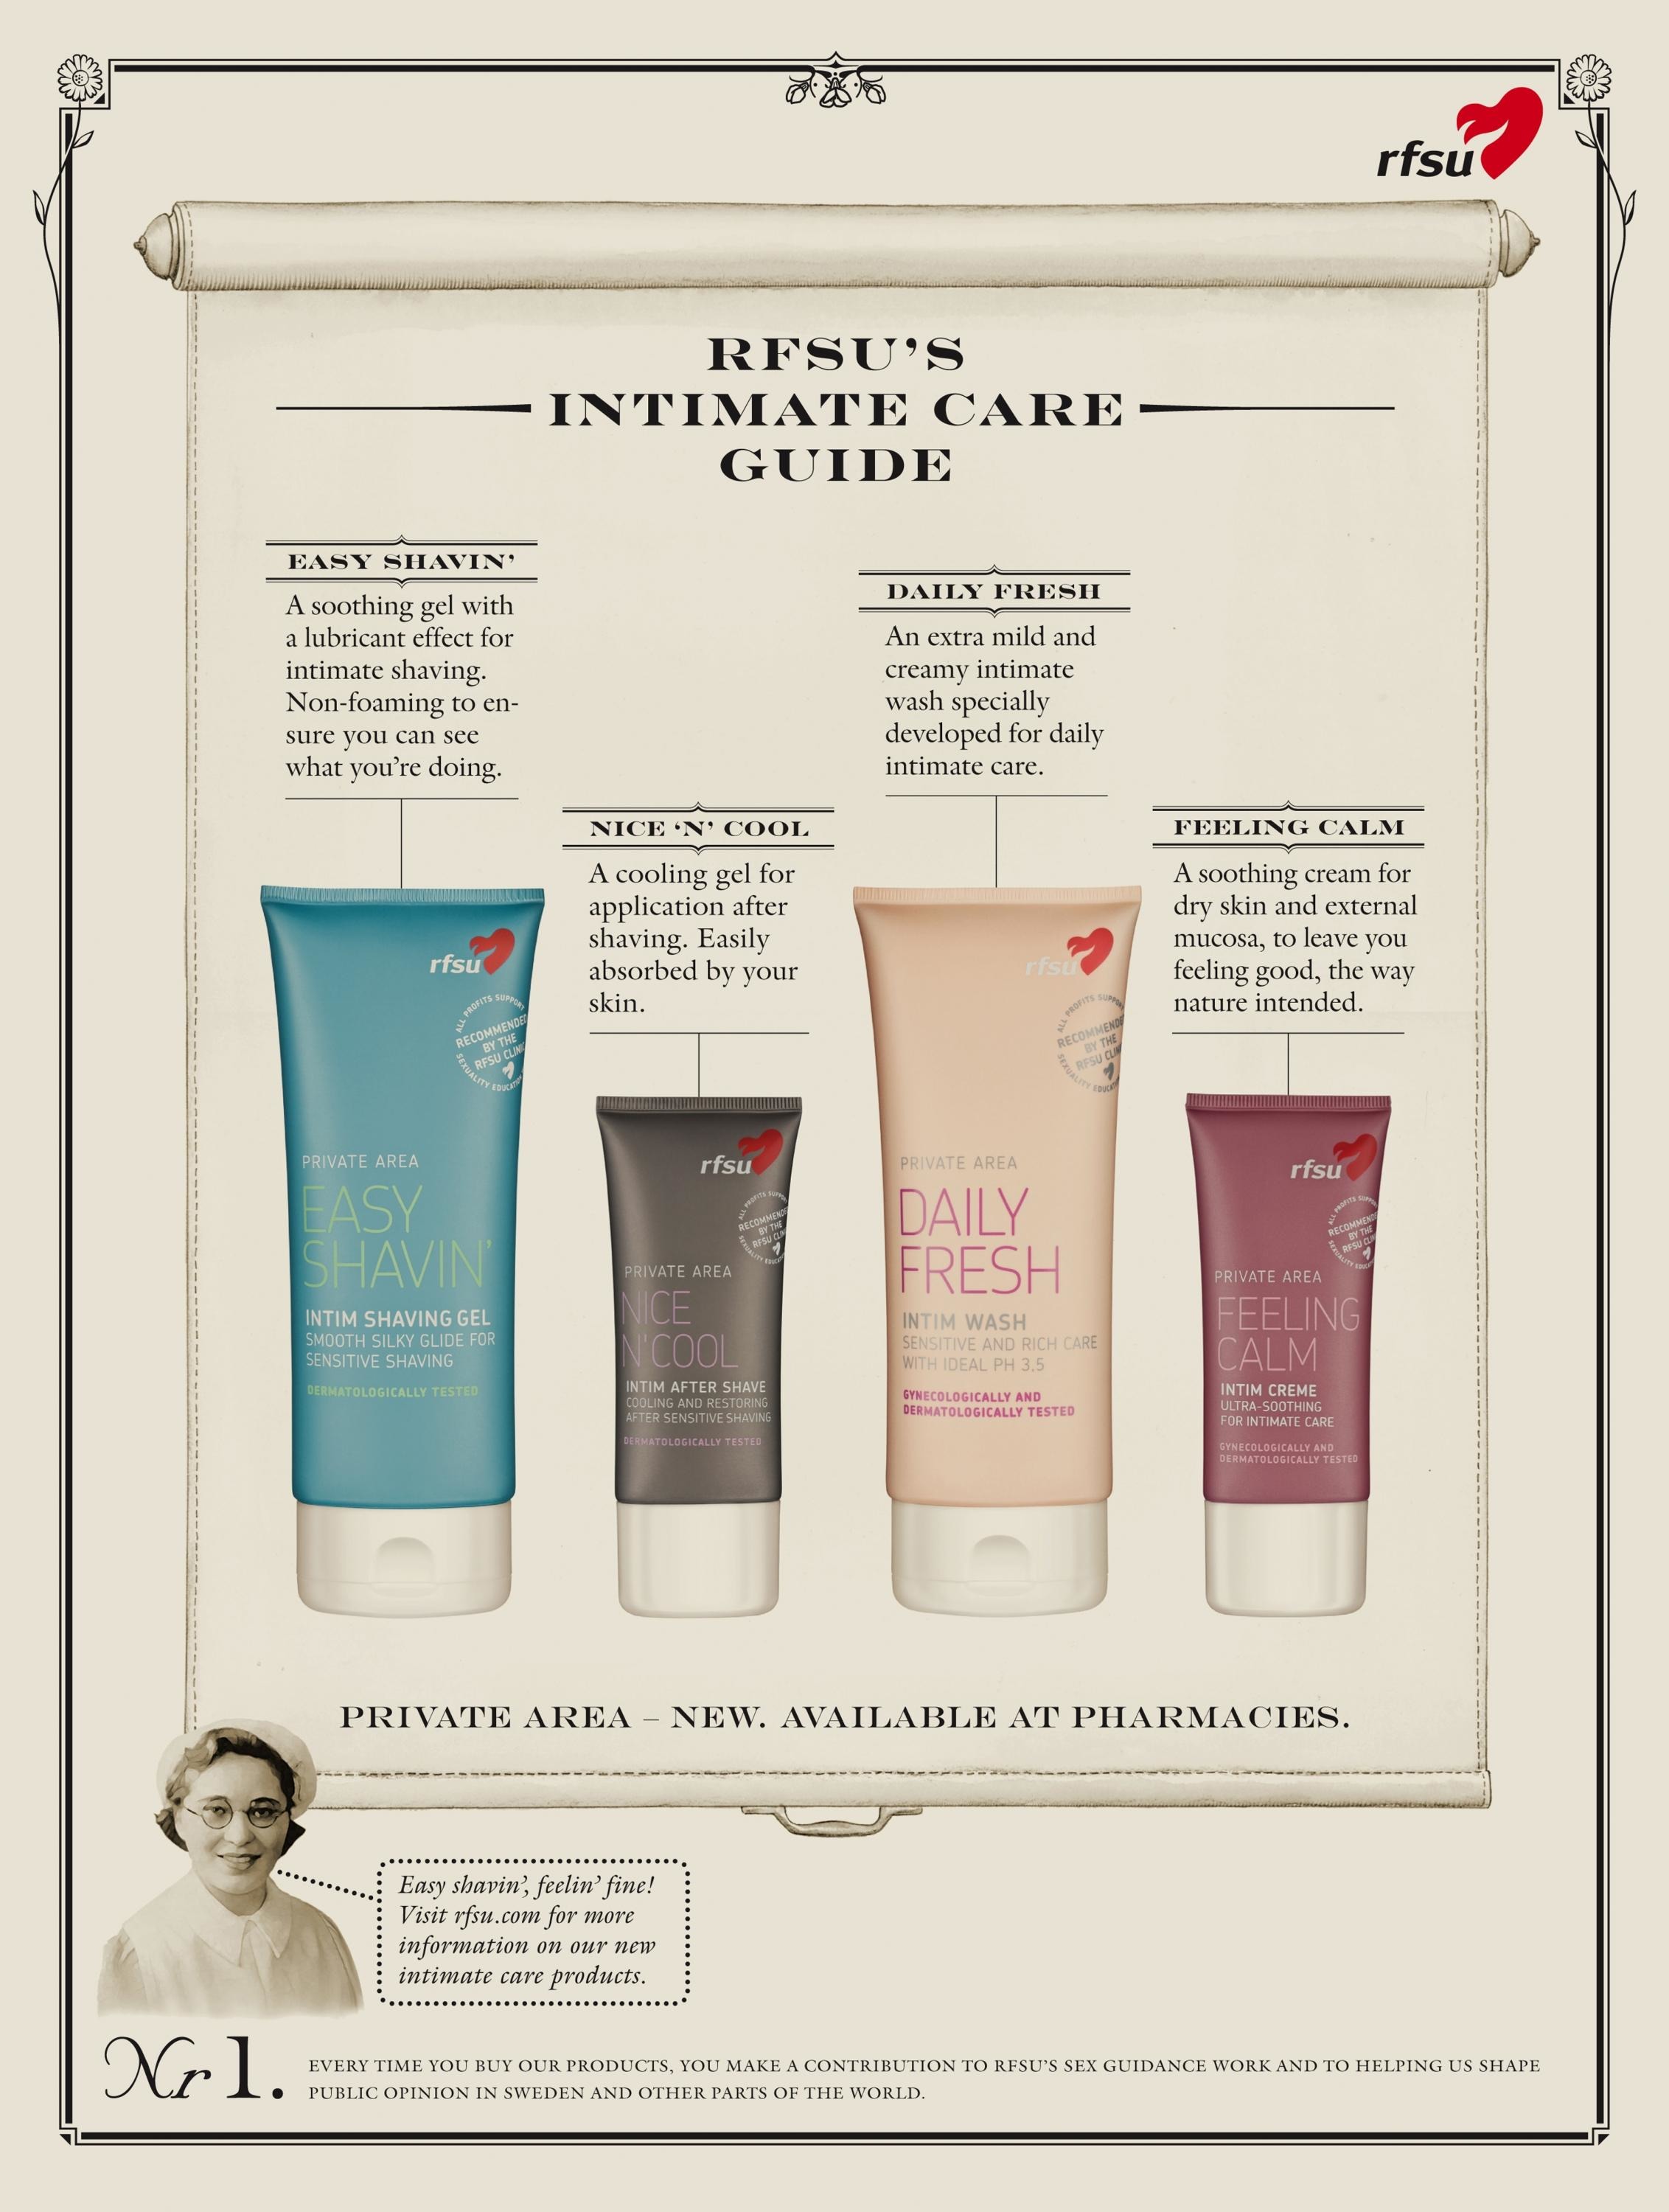 INTIMATE CARE PRODUCTS